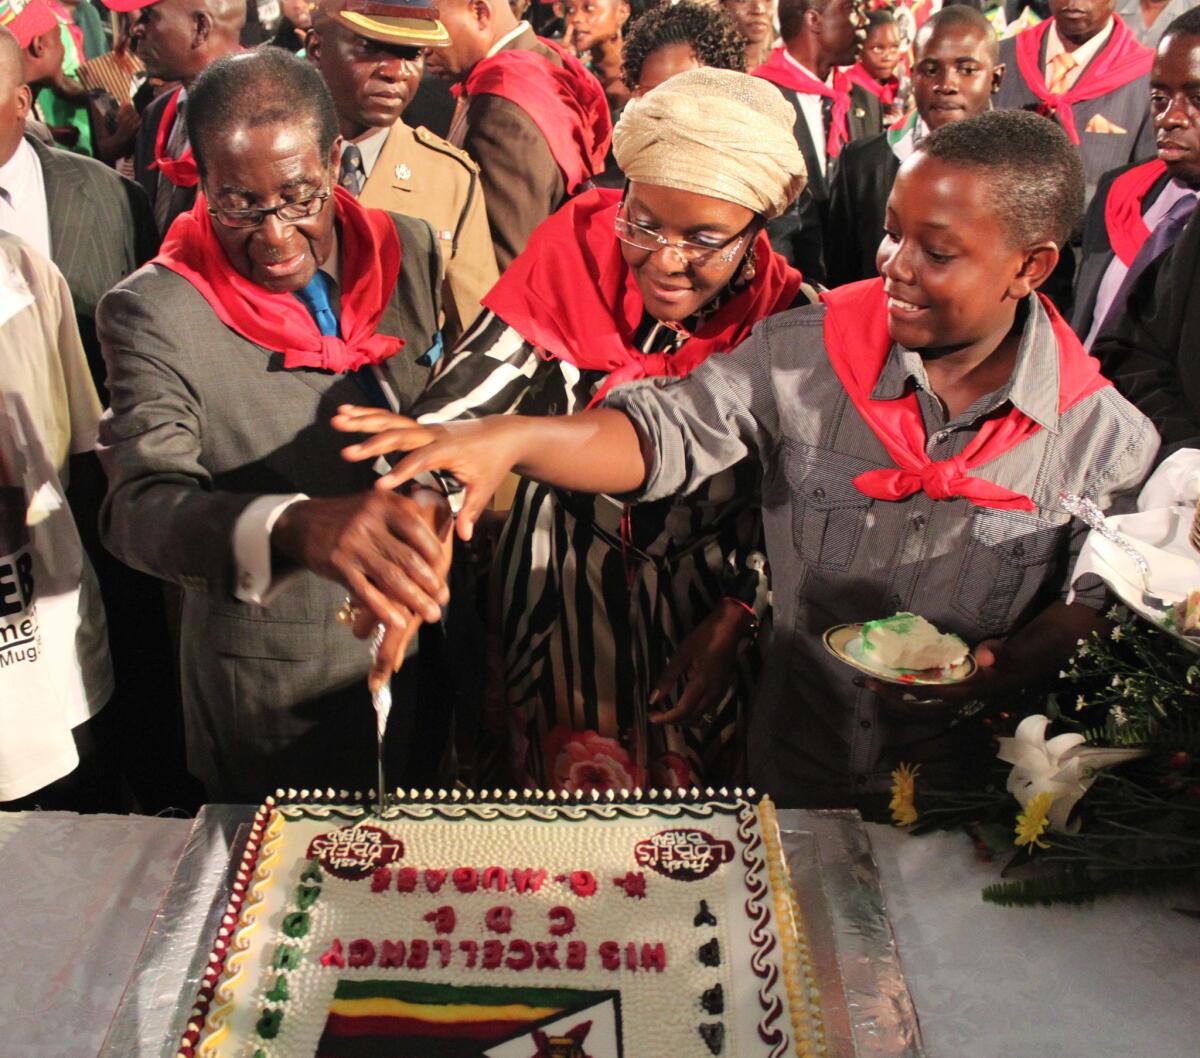 Zimbabwean President Robert Mugabe, left, helps cut his birthday cake, with his wife, Grace, and son Bellarmine Chatunga during celebrations for his 87th birthday.